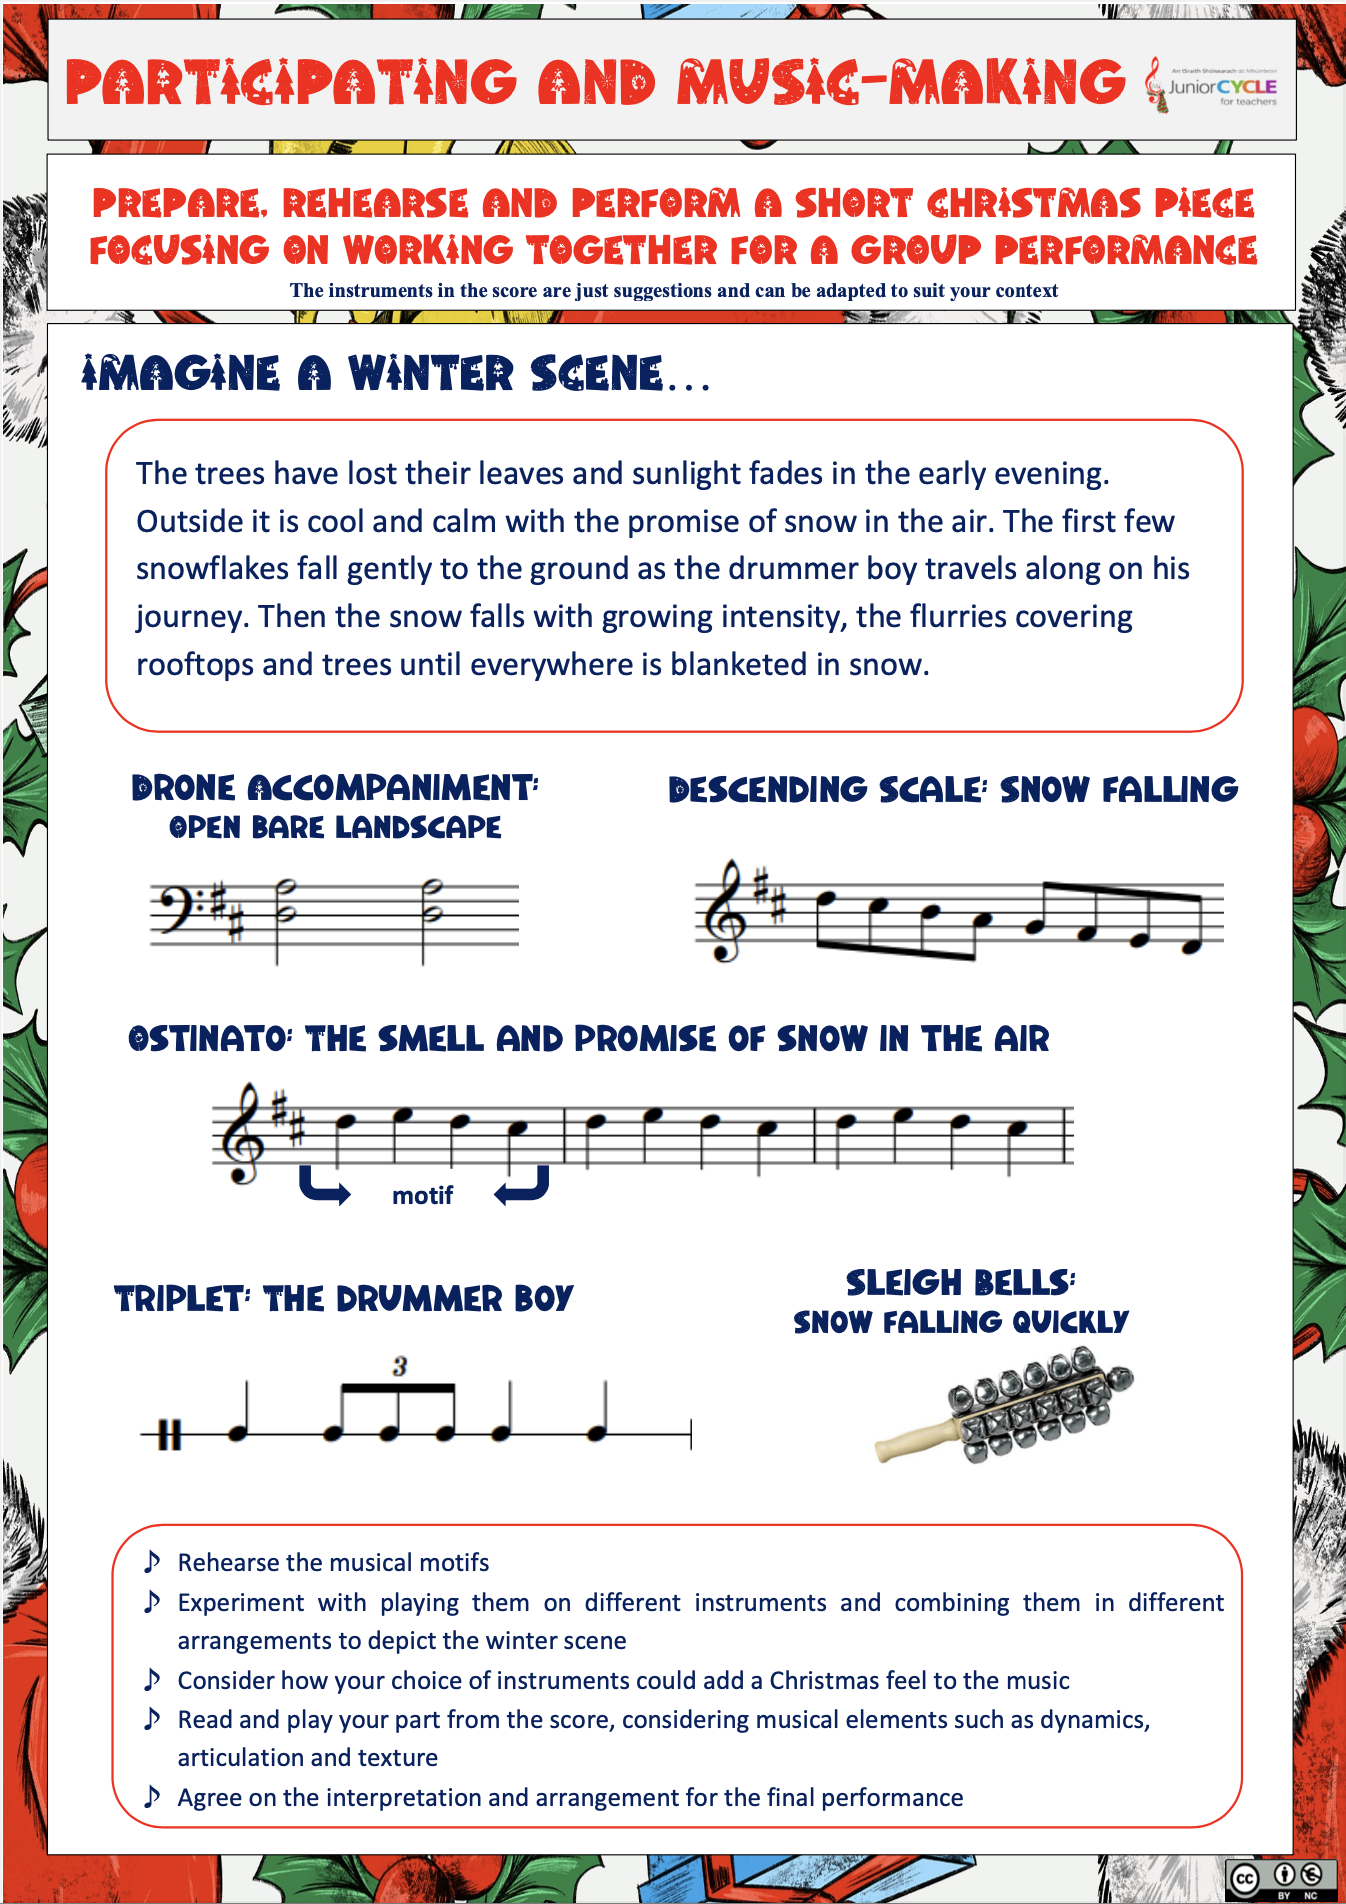 Participating and Music-making - A Winter Scene